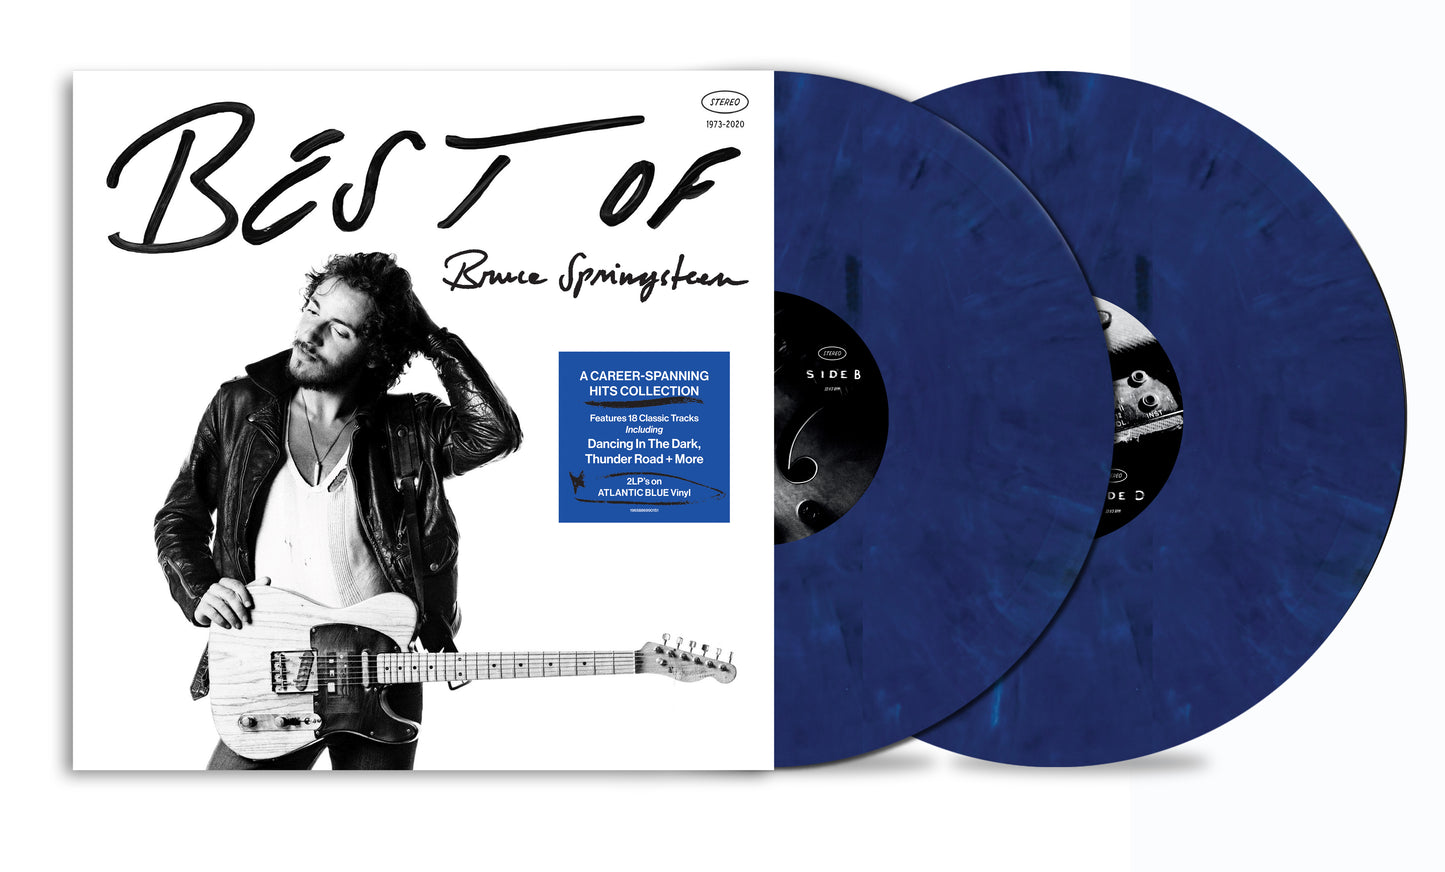 Bruce Springsteen - Best of Bruce Springsteen **INCLUDES EXCLUSIVE POSTER**